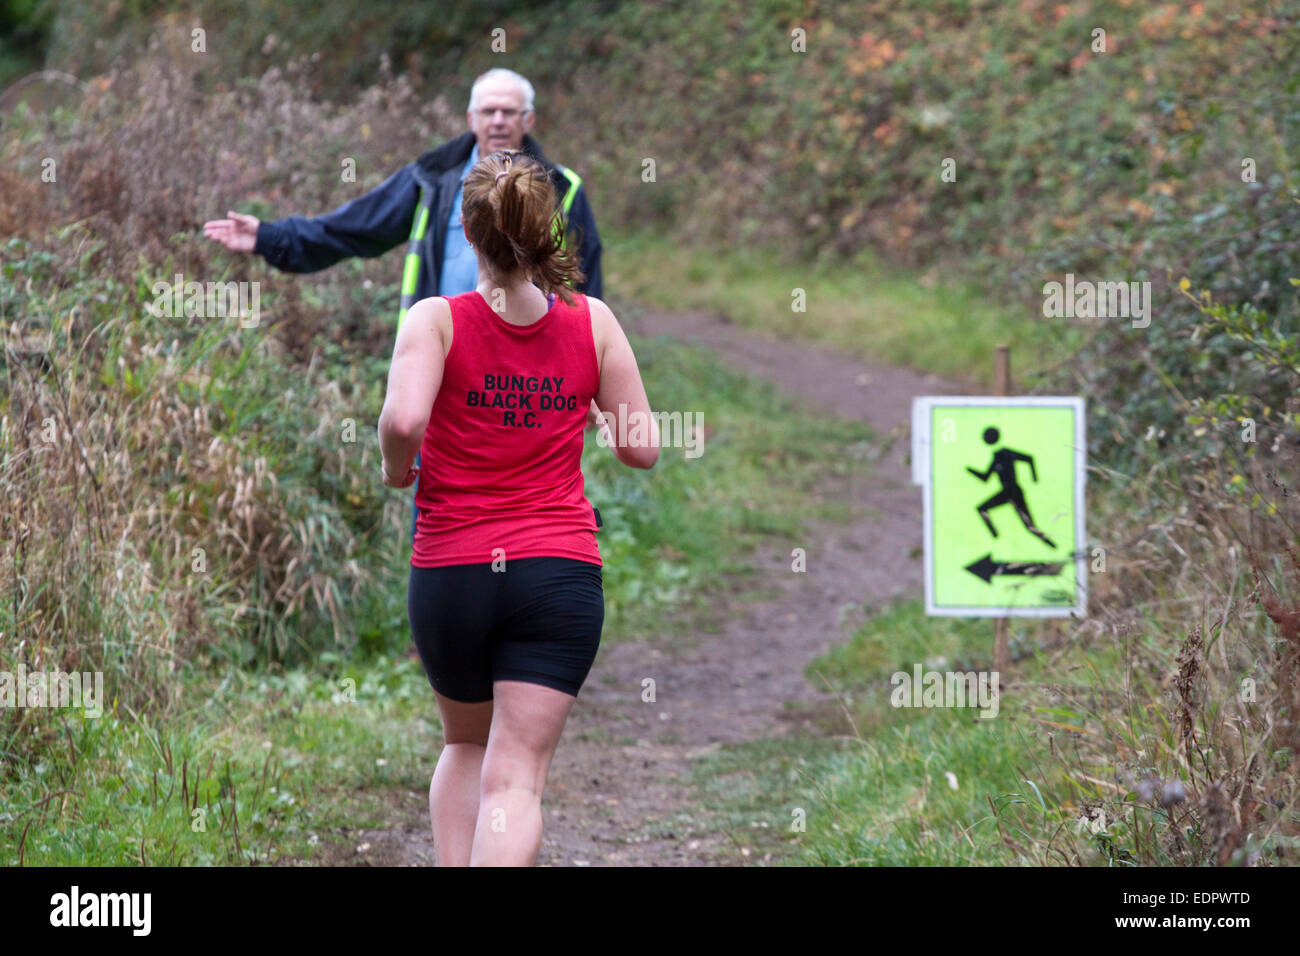 Woman runner in red top approaches a marshaled turn in a cross country race. Stock Photo